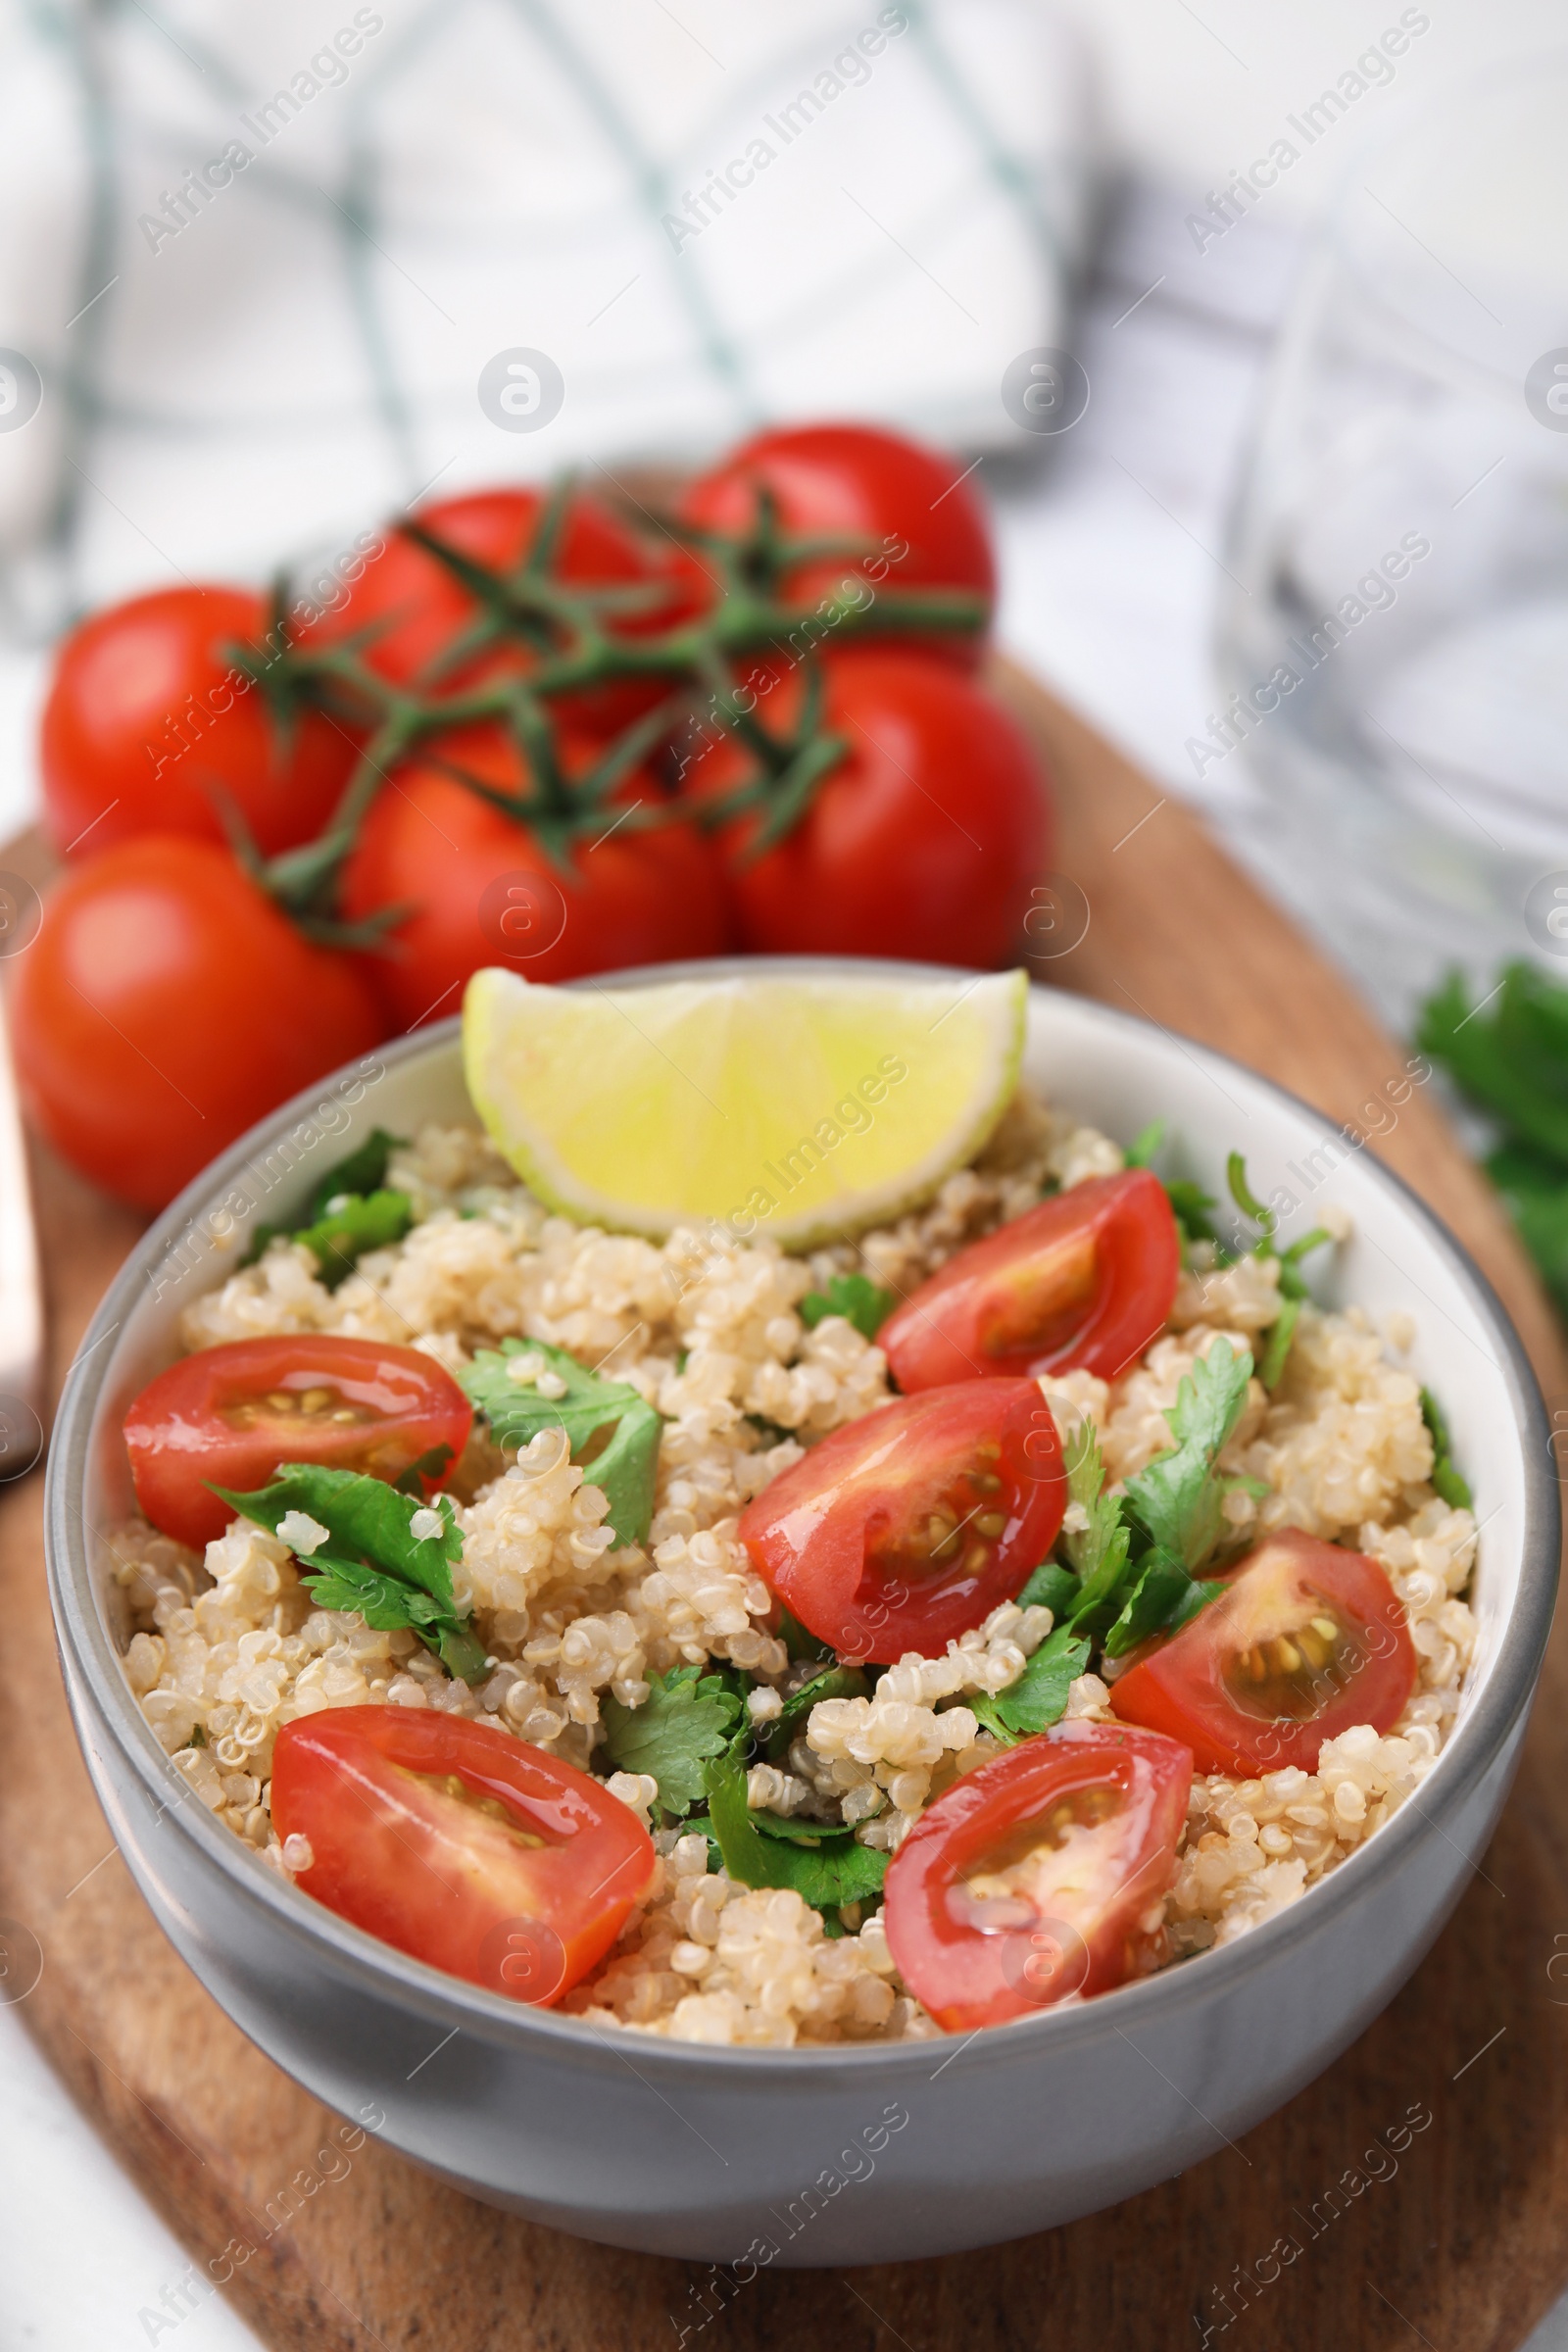 Photo of Delicious quinoa salad with tomatoes, parsley and lime served on white wooden table